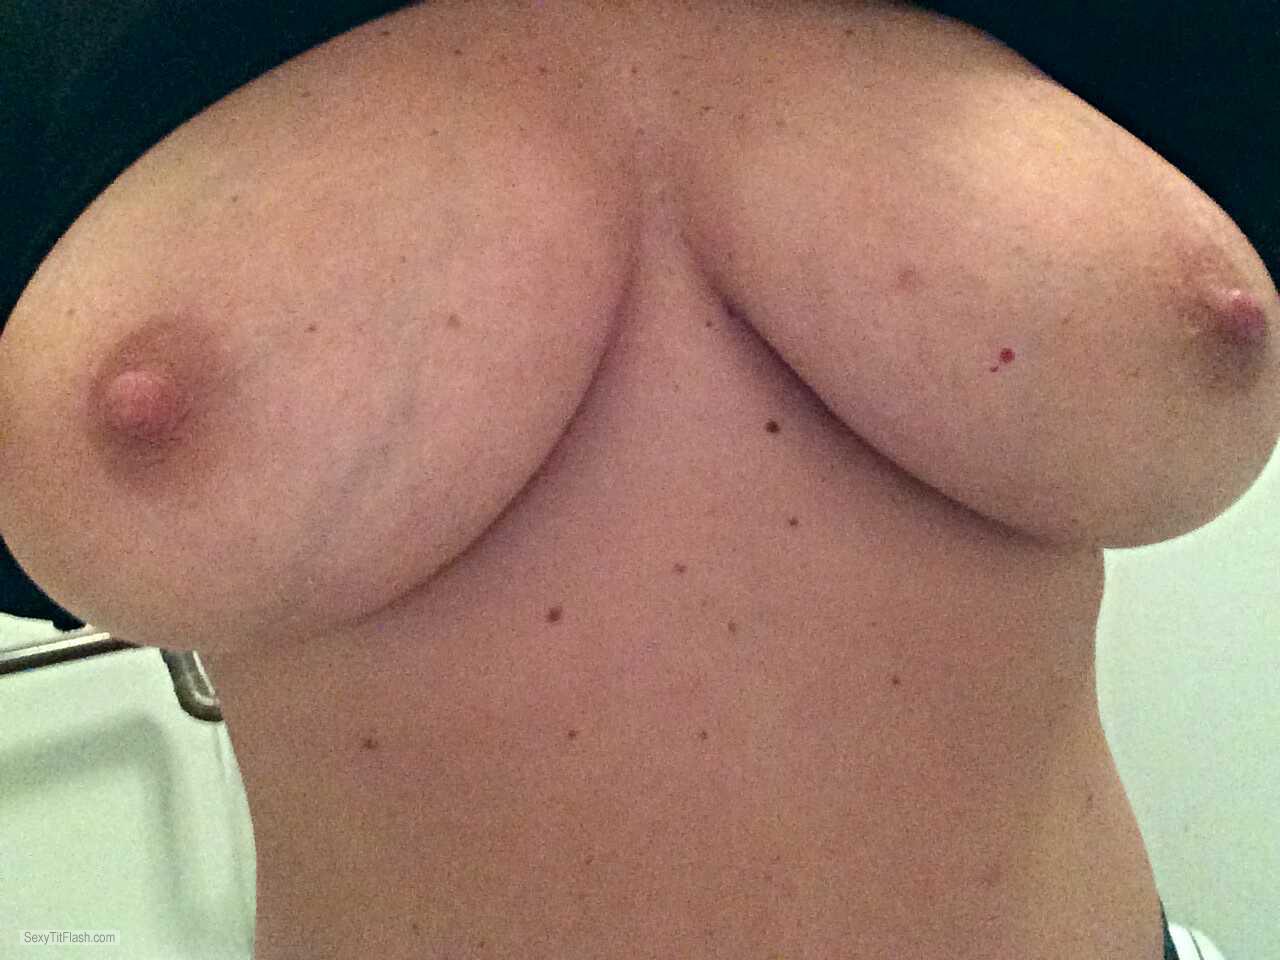 Tit Flash: My Very Big Tits (Selfie) - Big Natural from United States